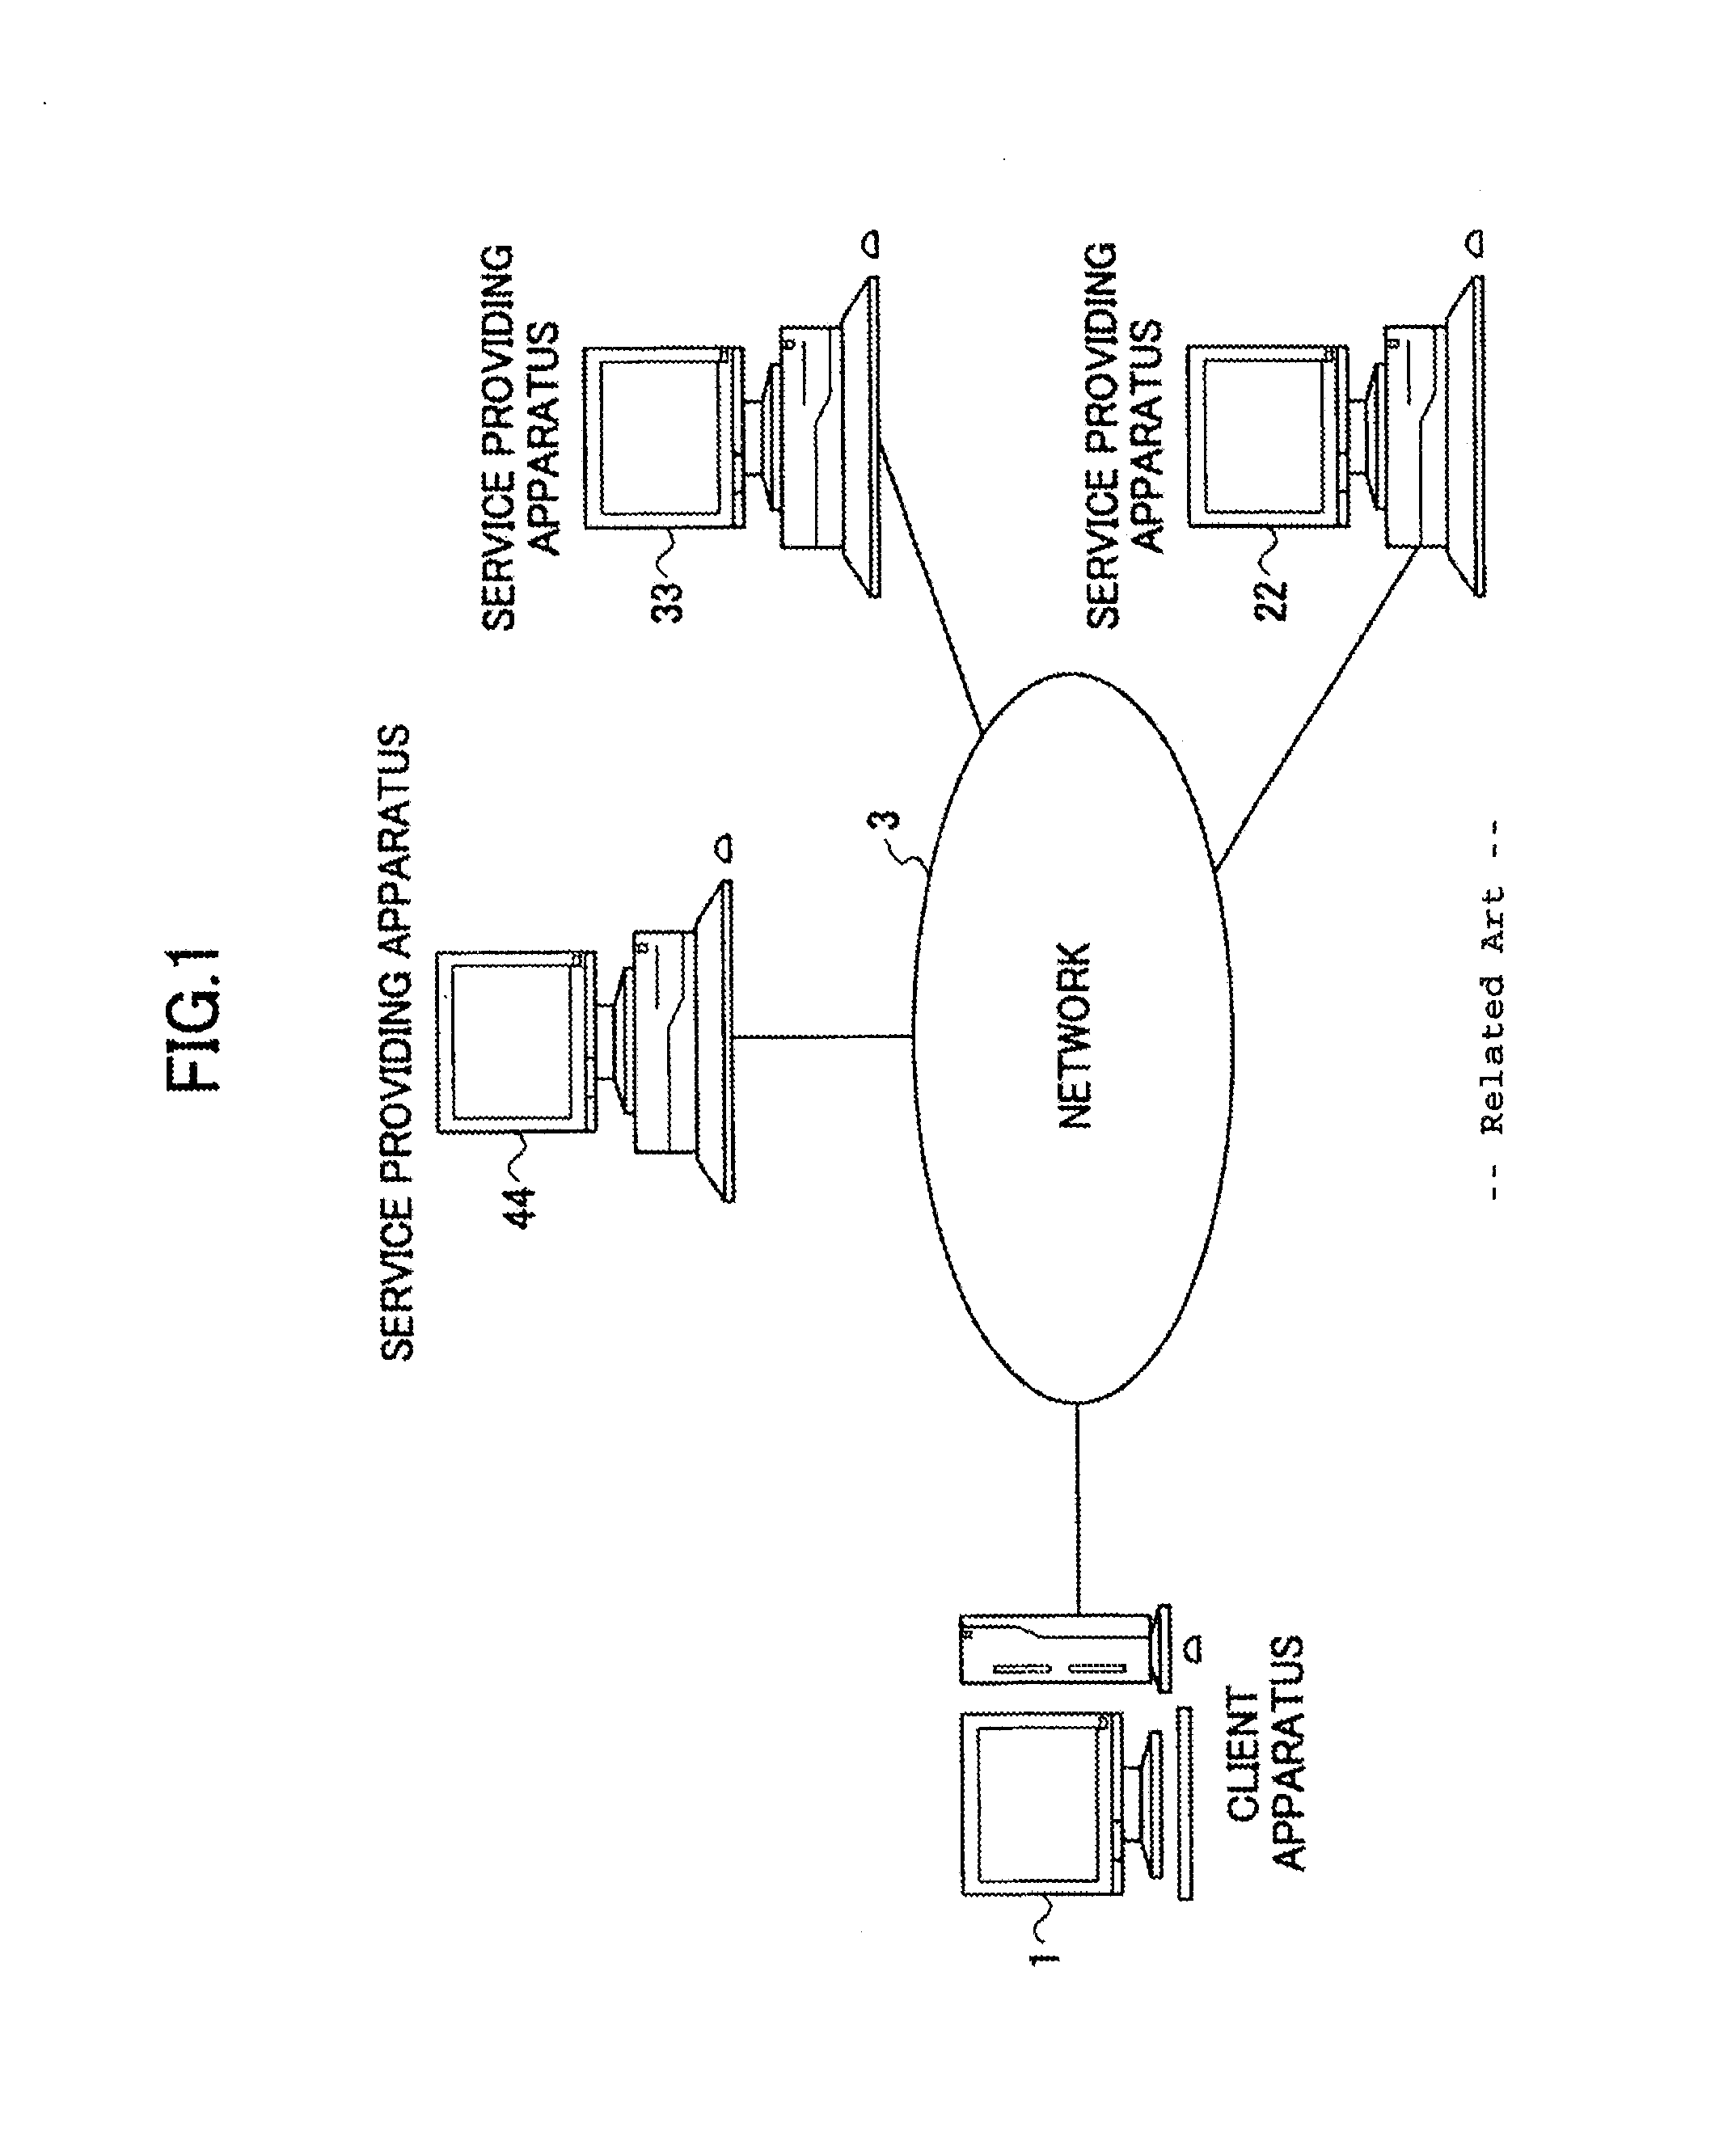 Communication method selection for exchanging information between service requester and service provider